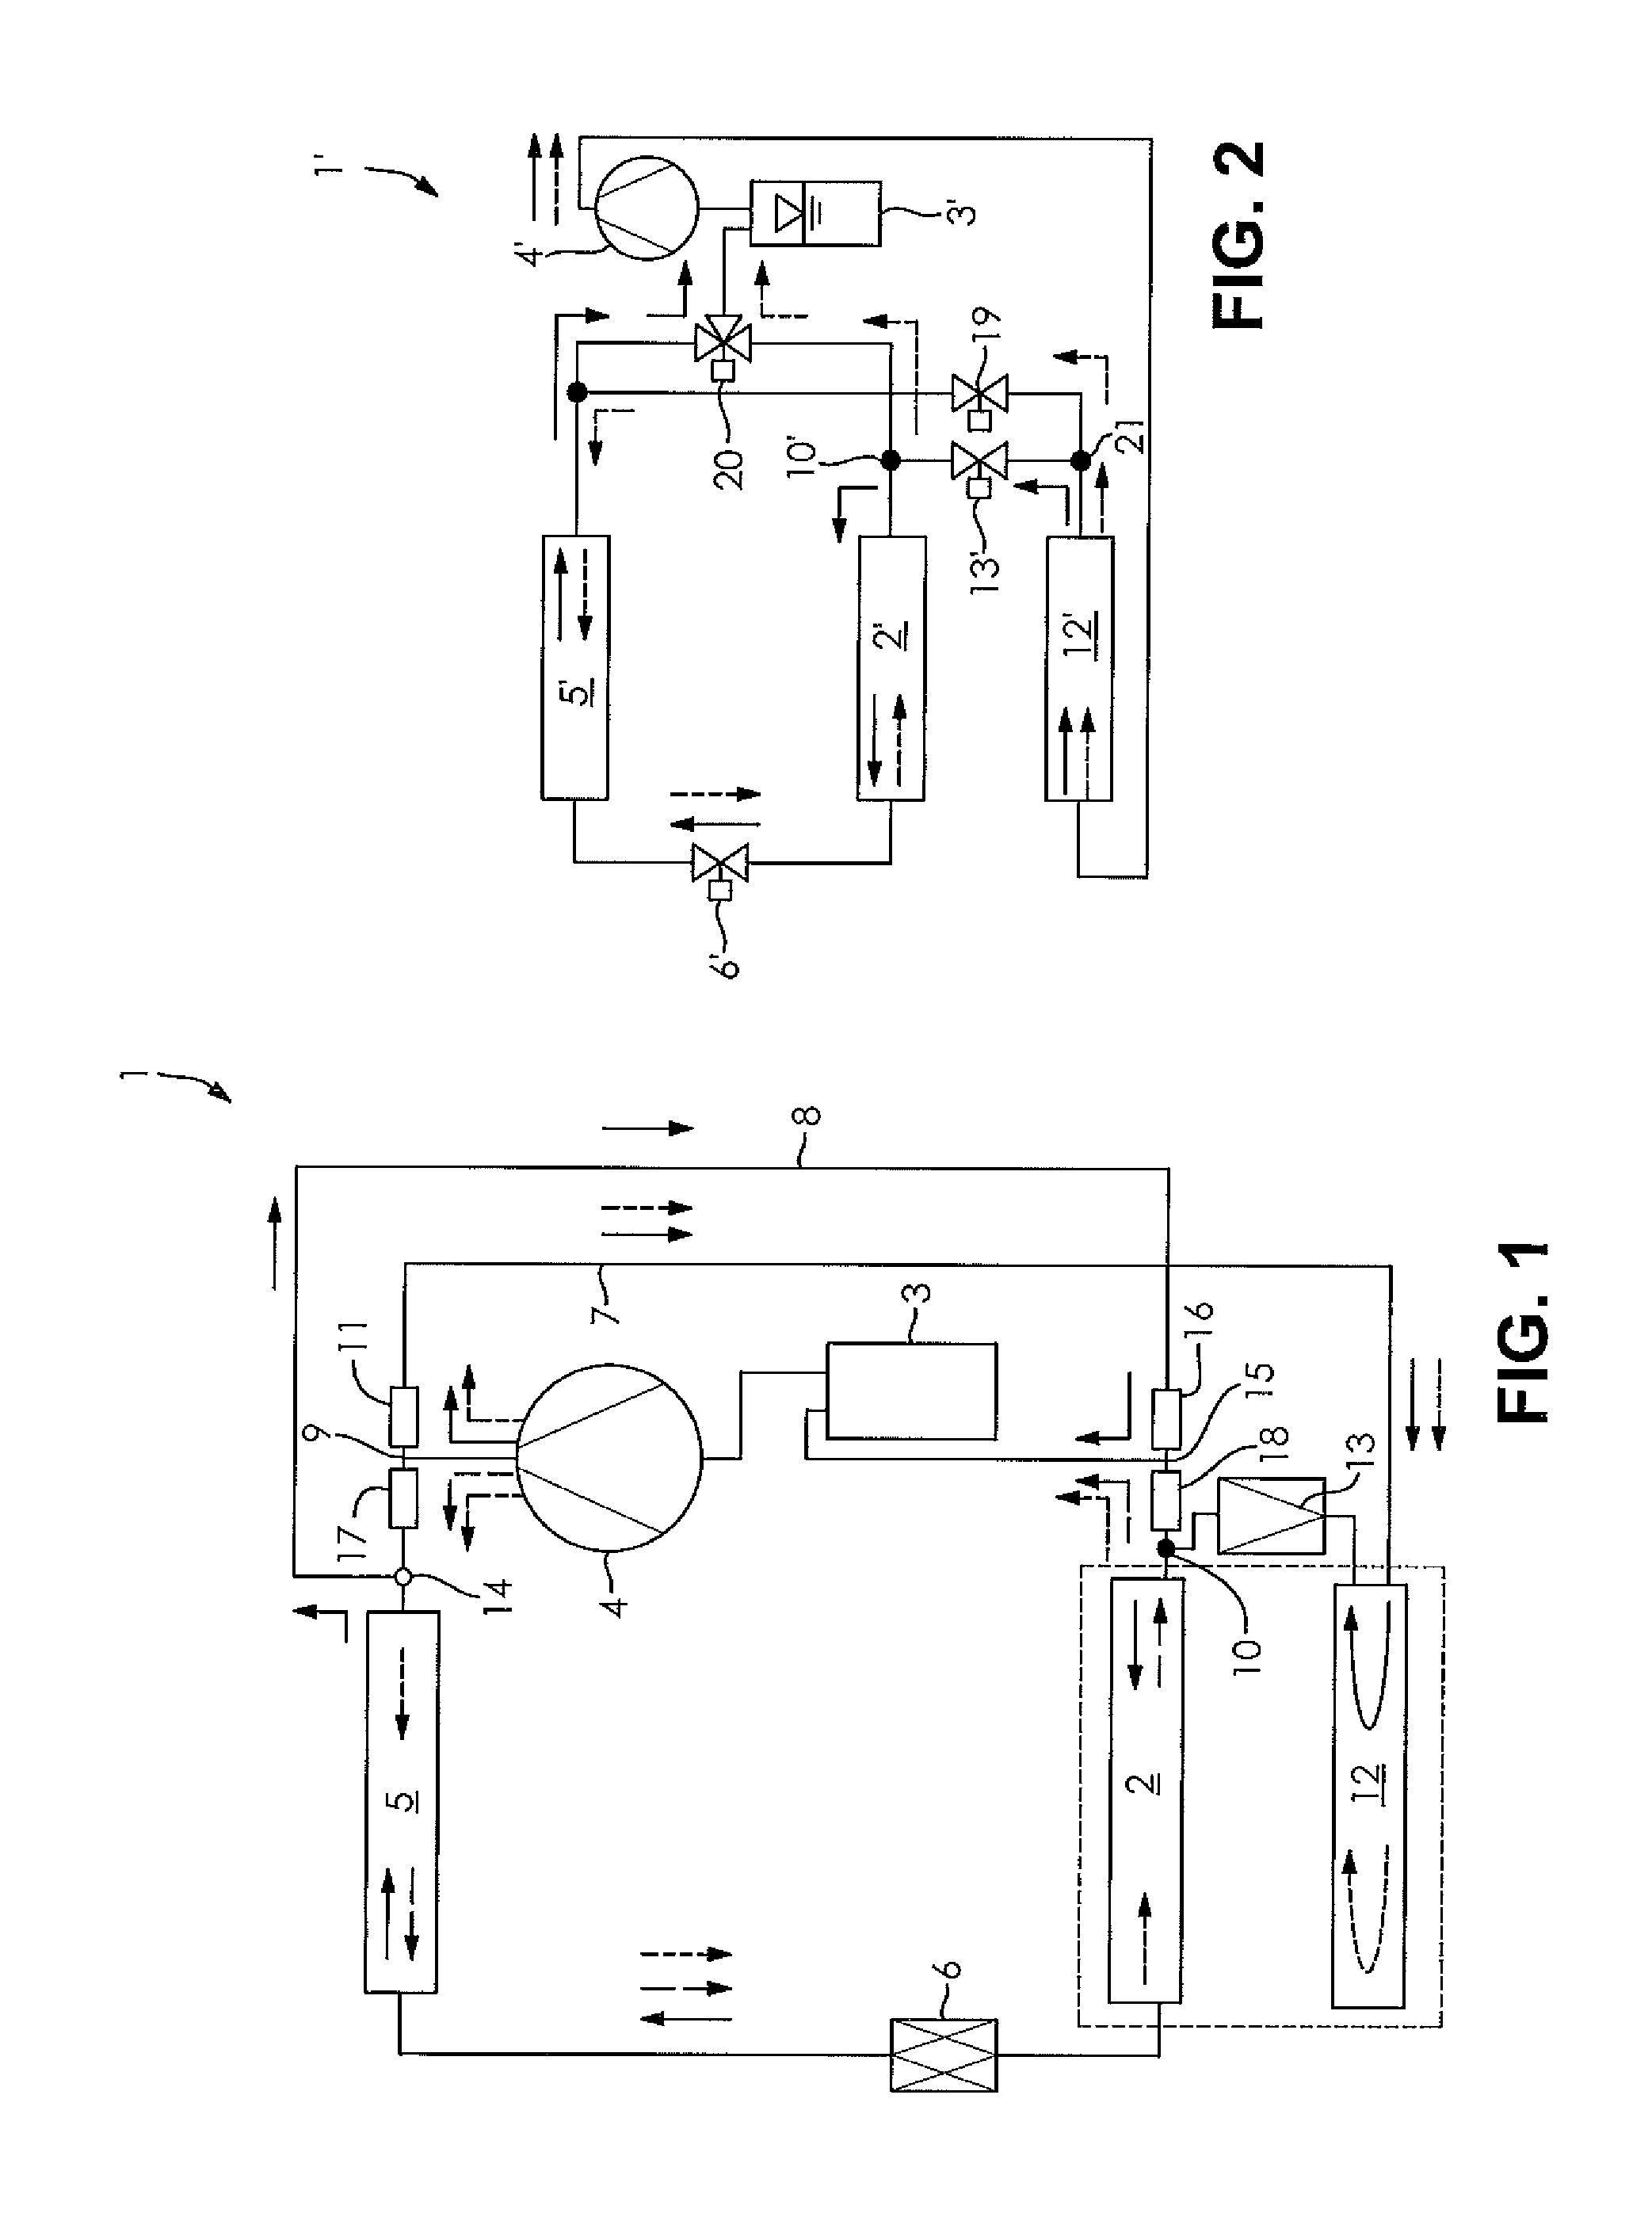 Refrigerant circuit of an air conditioner with heat pump